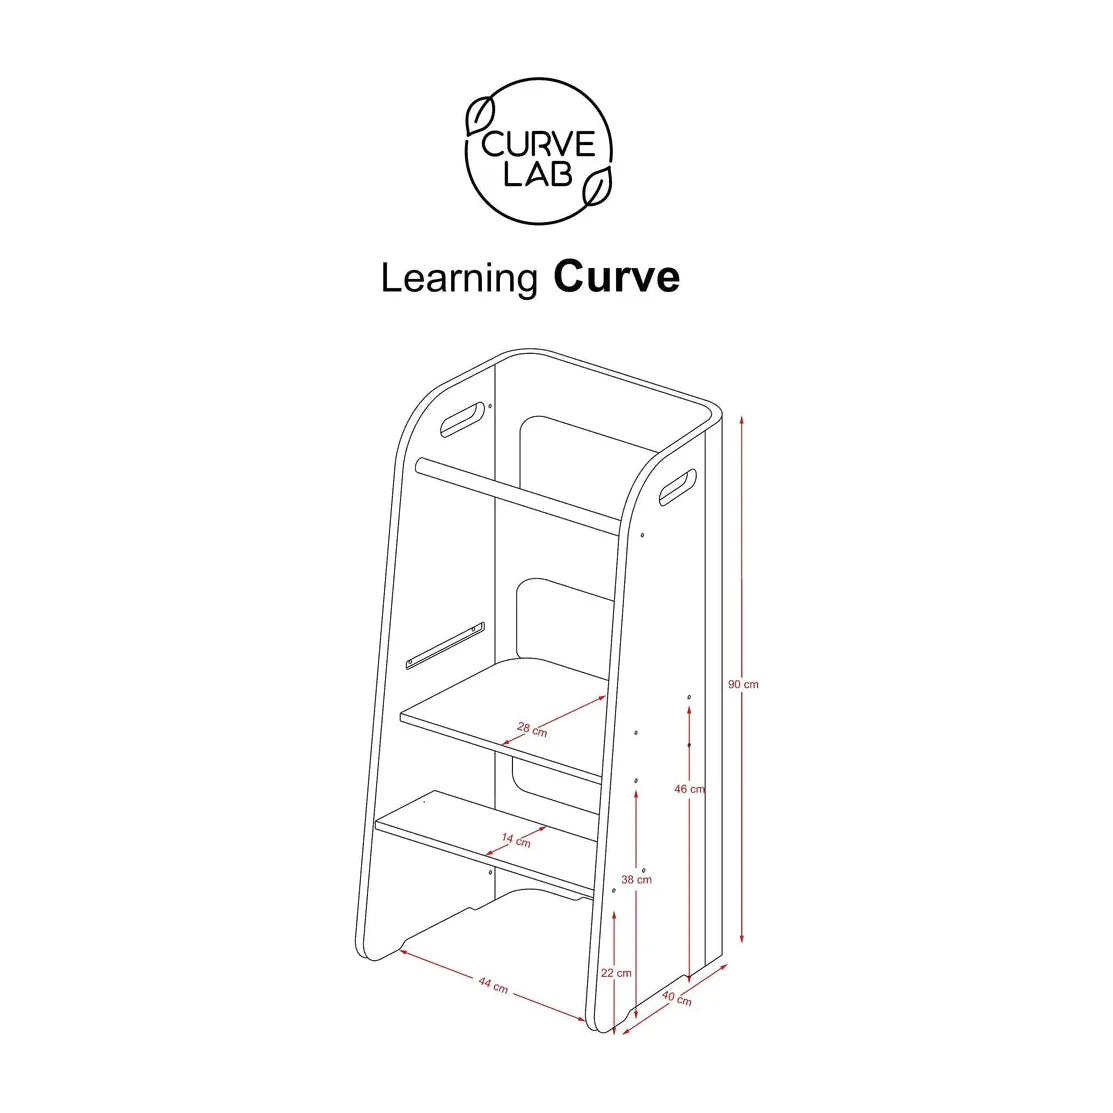 Curve Lab Learning Curve Learning Tower dimensions